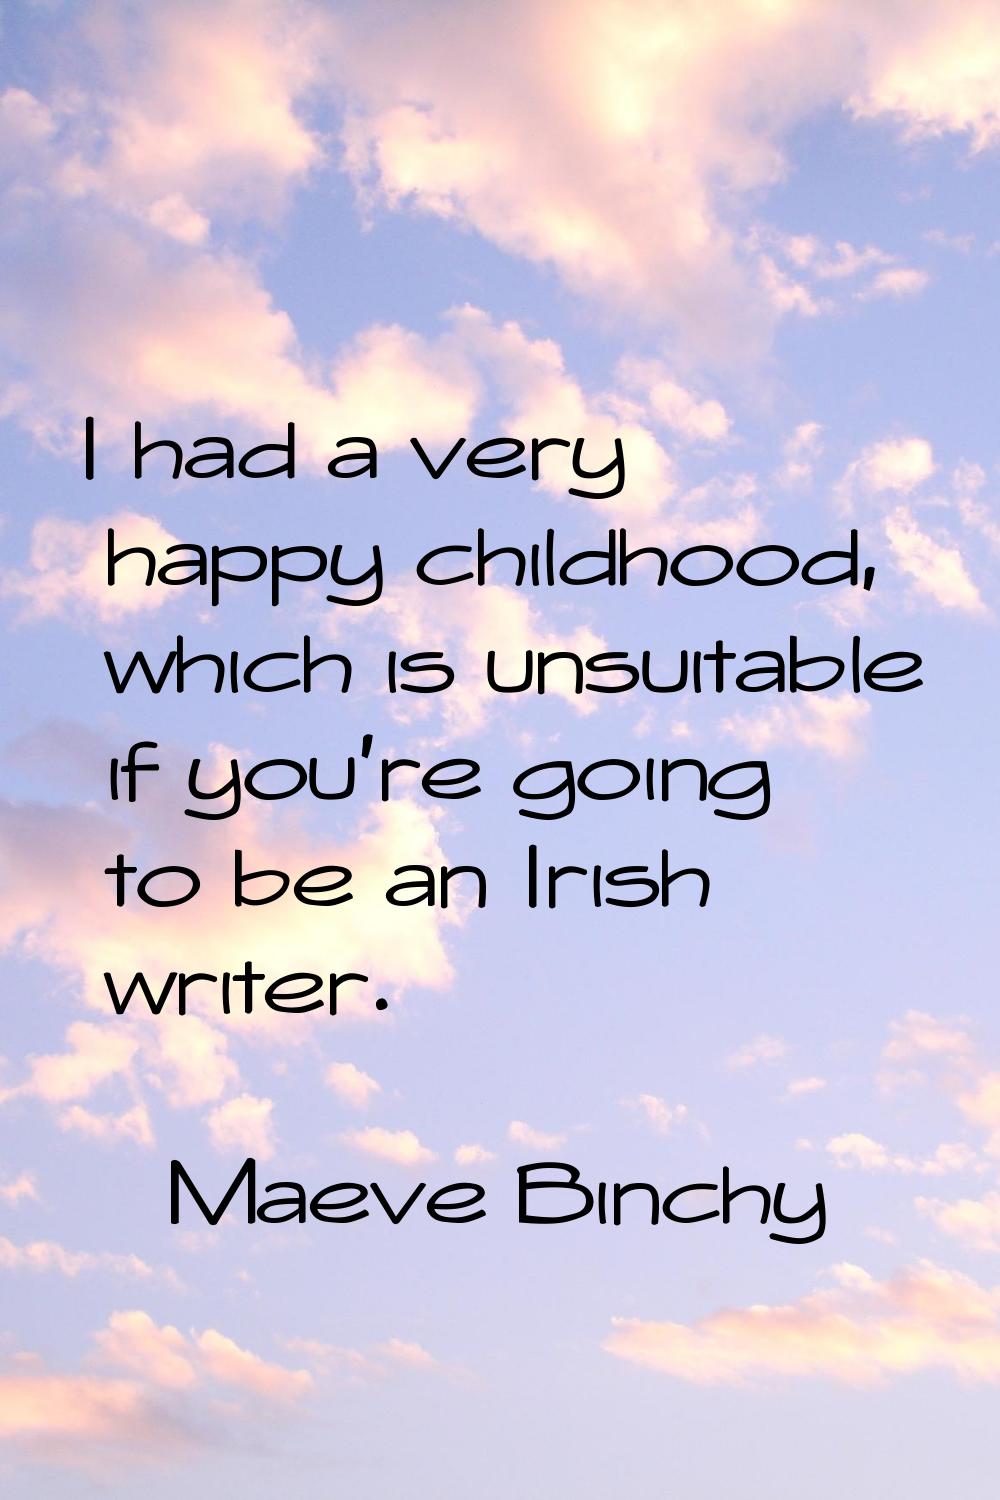 I had a very happy childhood, which is unsuitable if you're going to be an Irish writer.